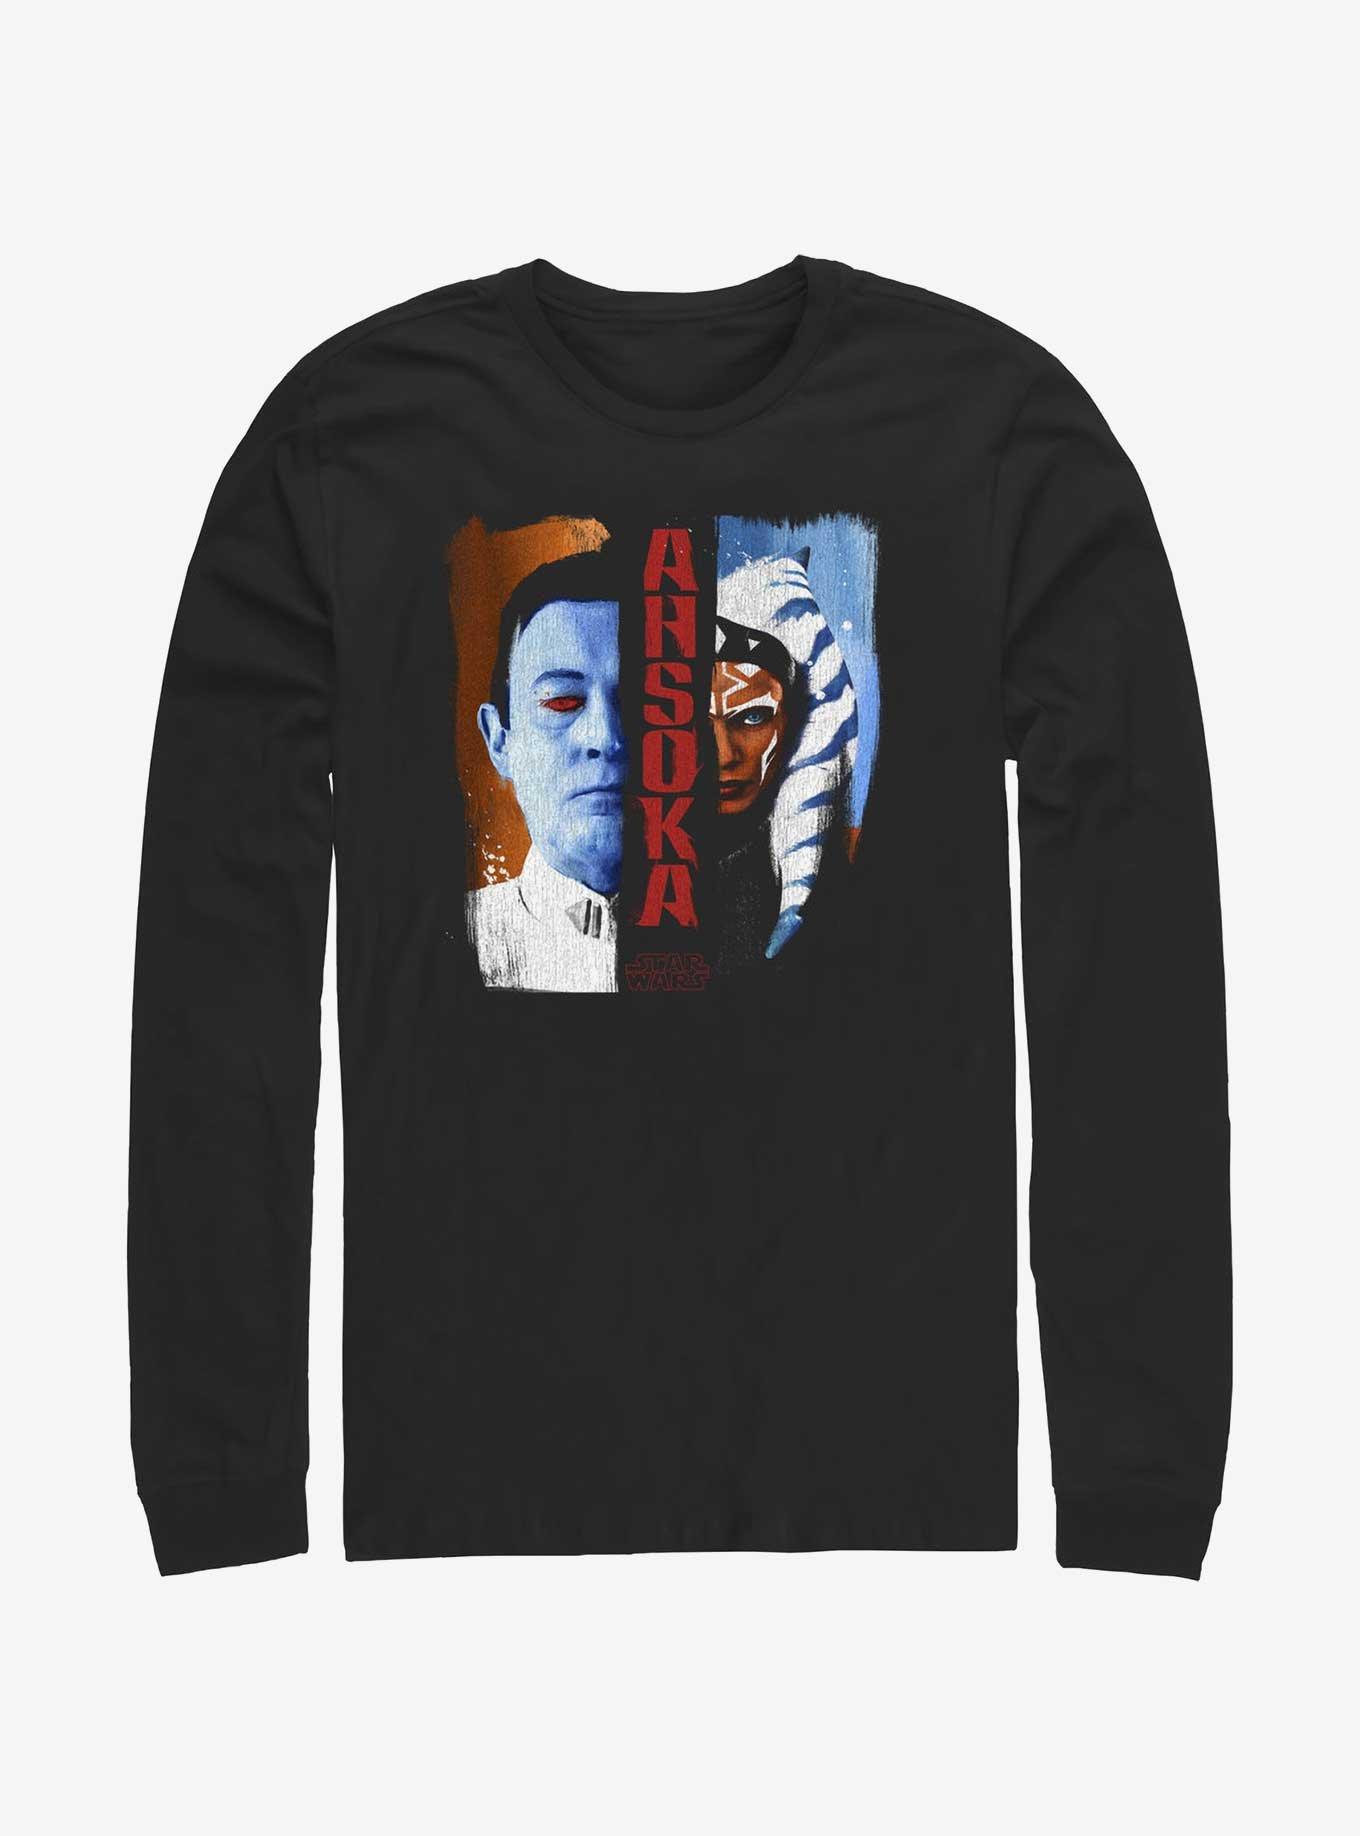 Star Wars Complimentary Conflict Thrawn and Ahsoka Long-Sleeve T-Shirt, BLACK, hi-res